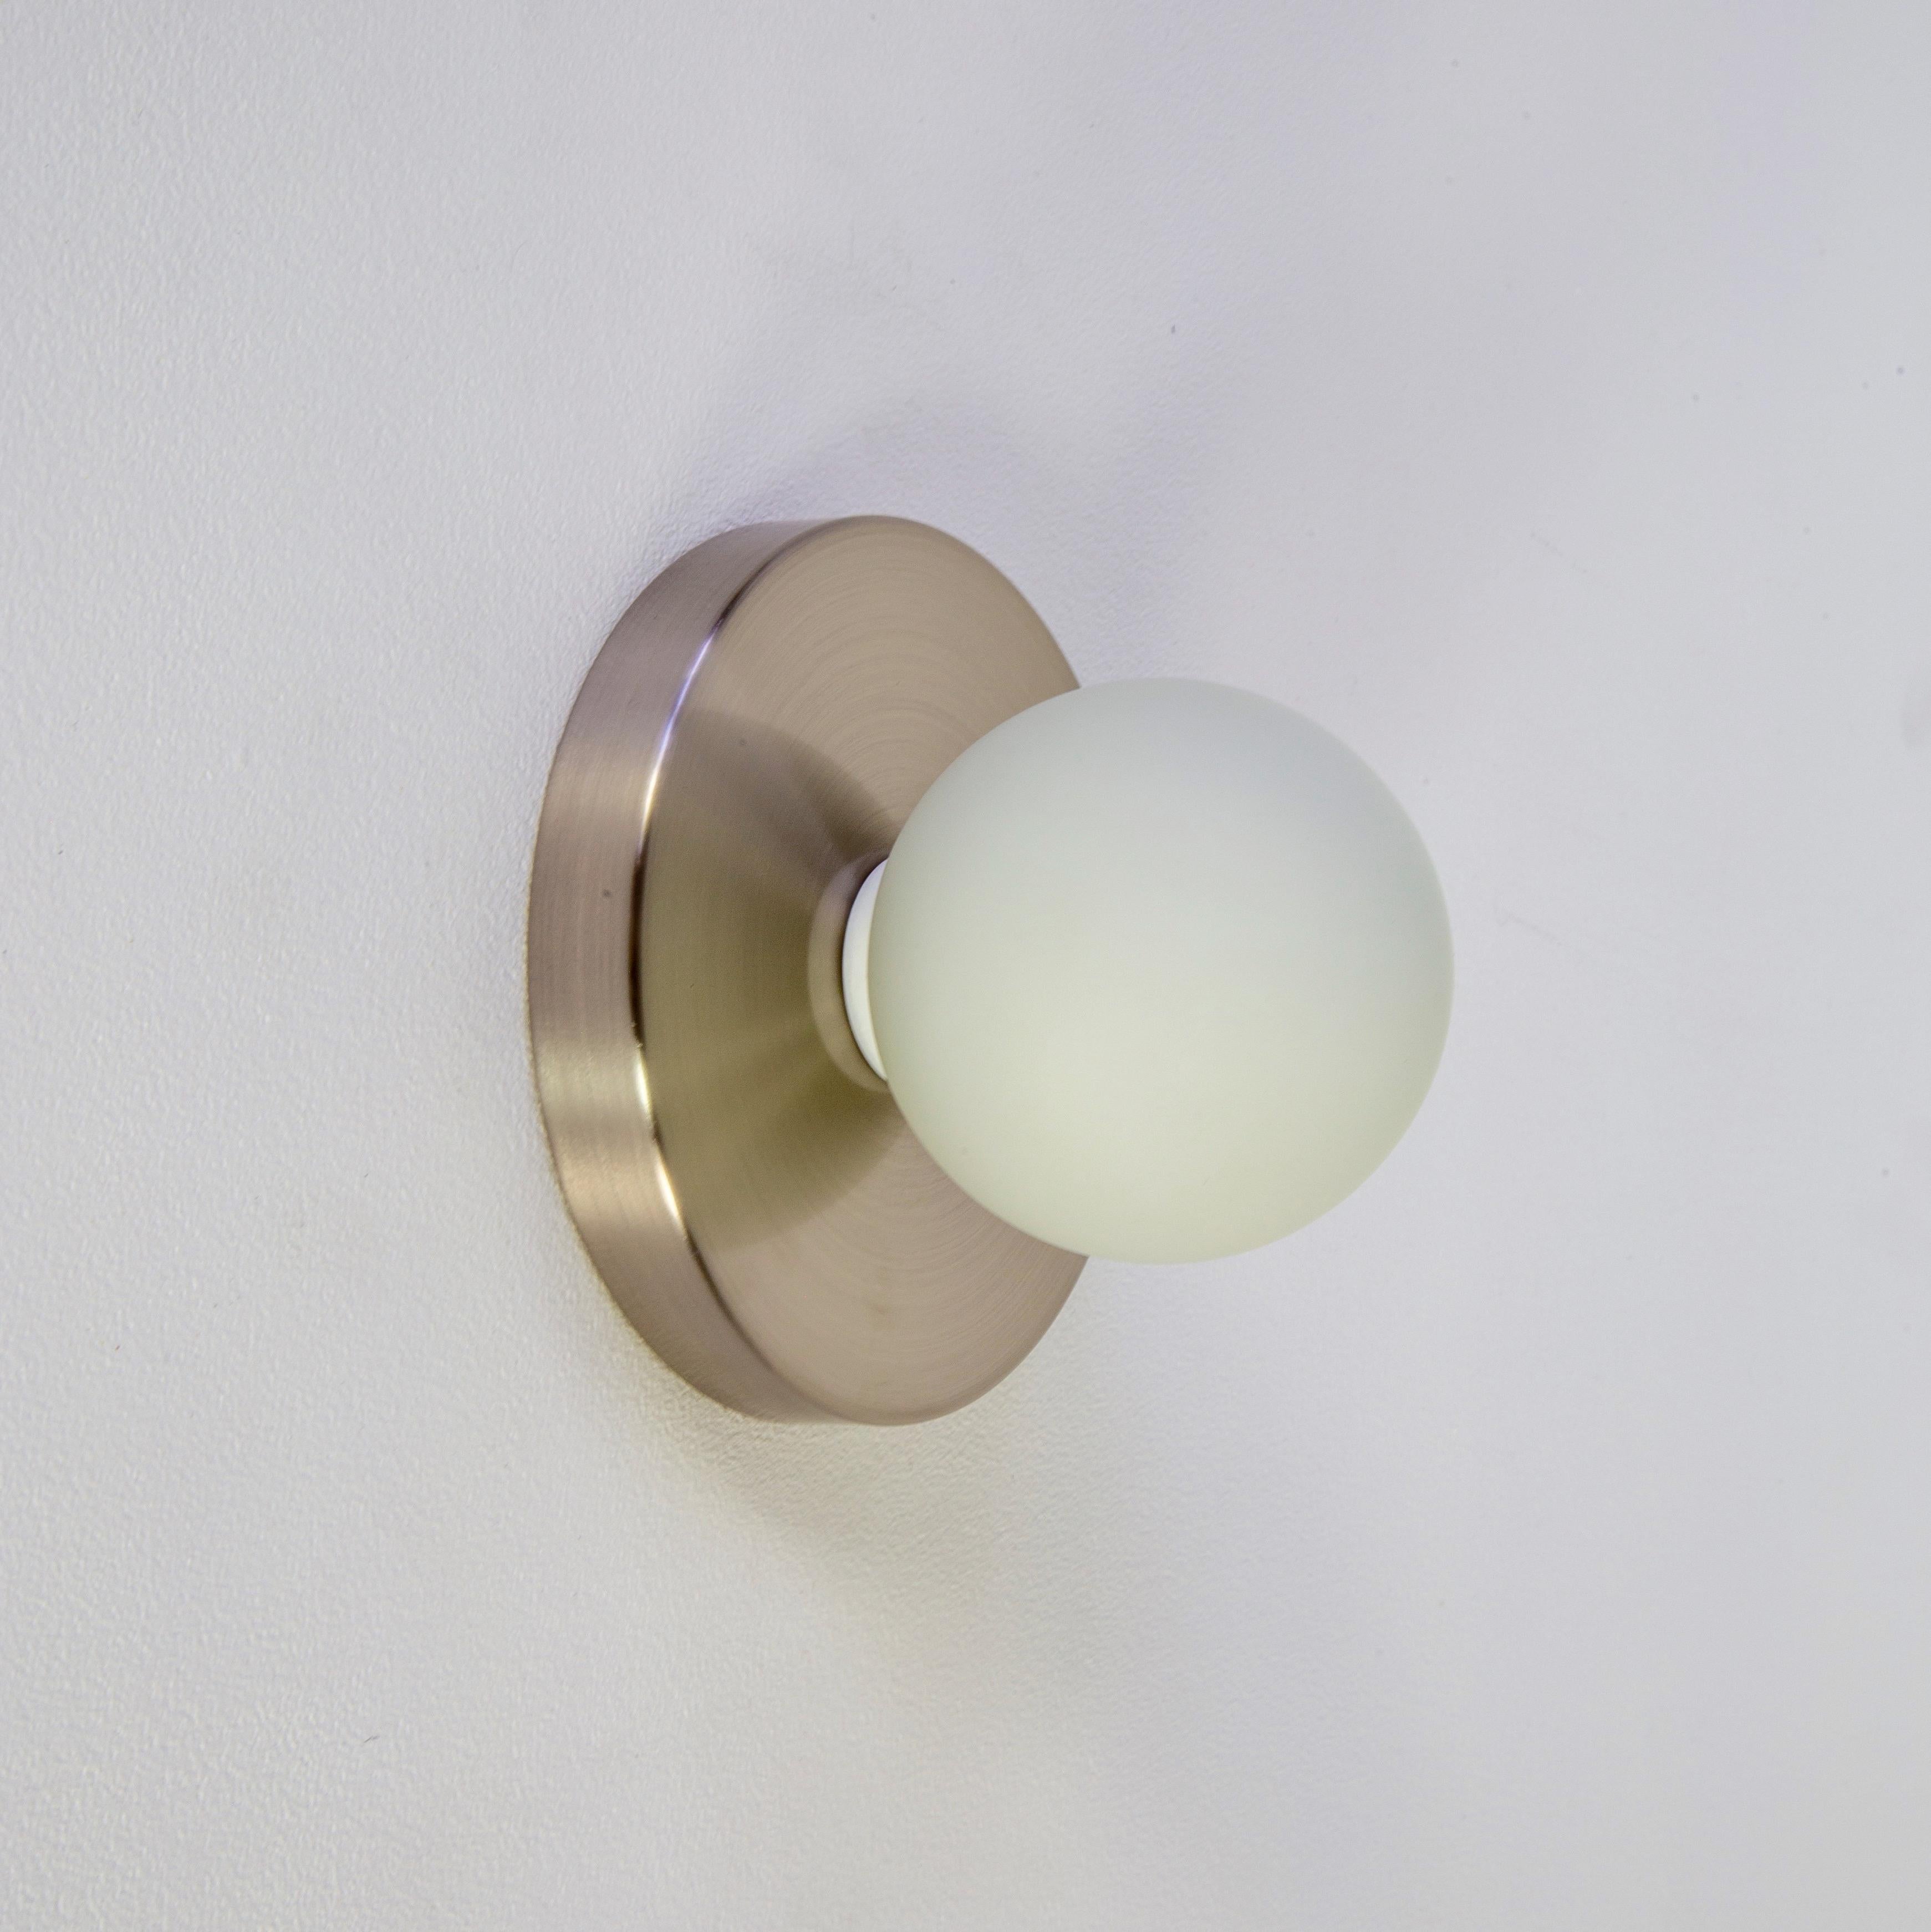 Plated Globe Sconce by Research.Lighting, Brushed Nickel, In Stock For Sale